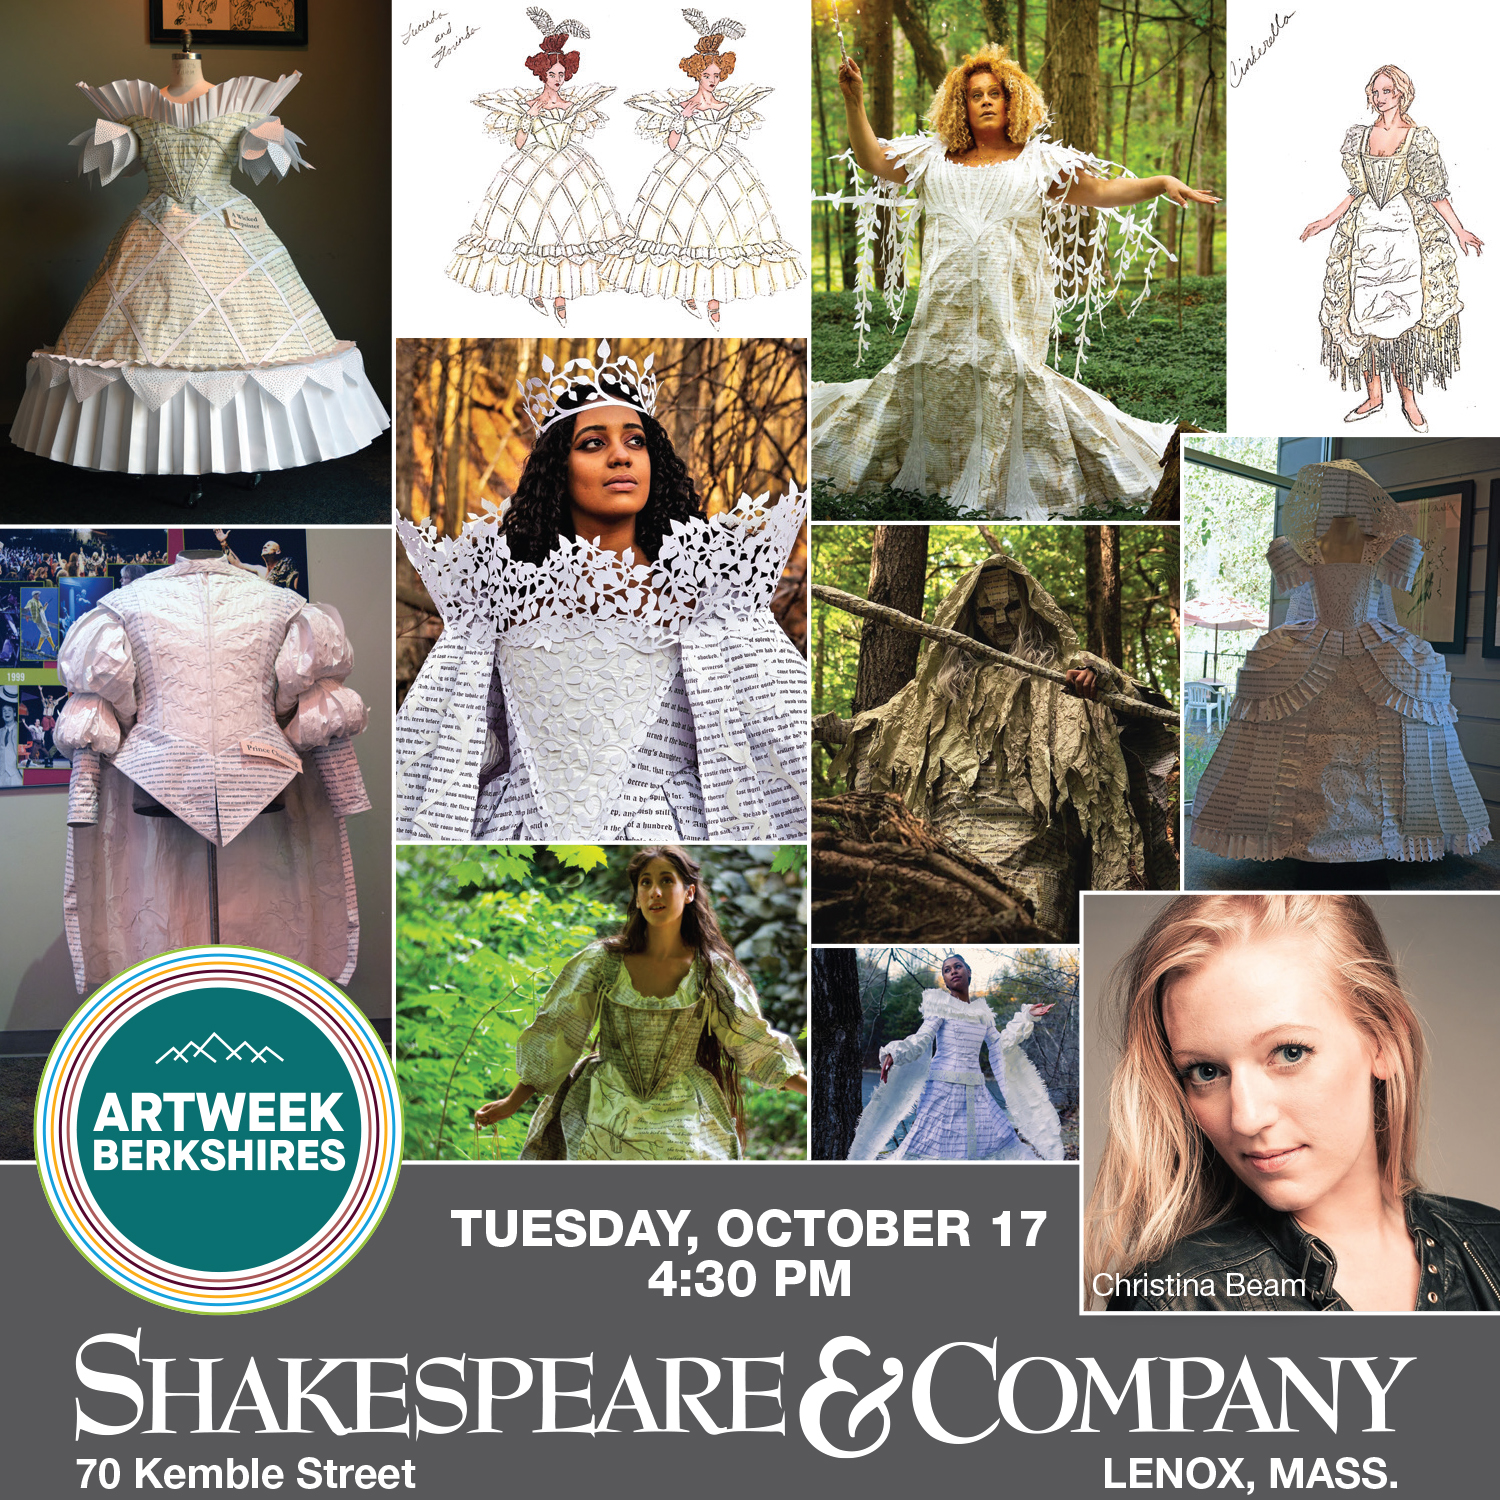 In the Woods Exhibit Artist Christina Beam to Appear at Shakespeare & Company October 17